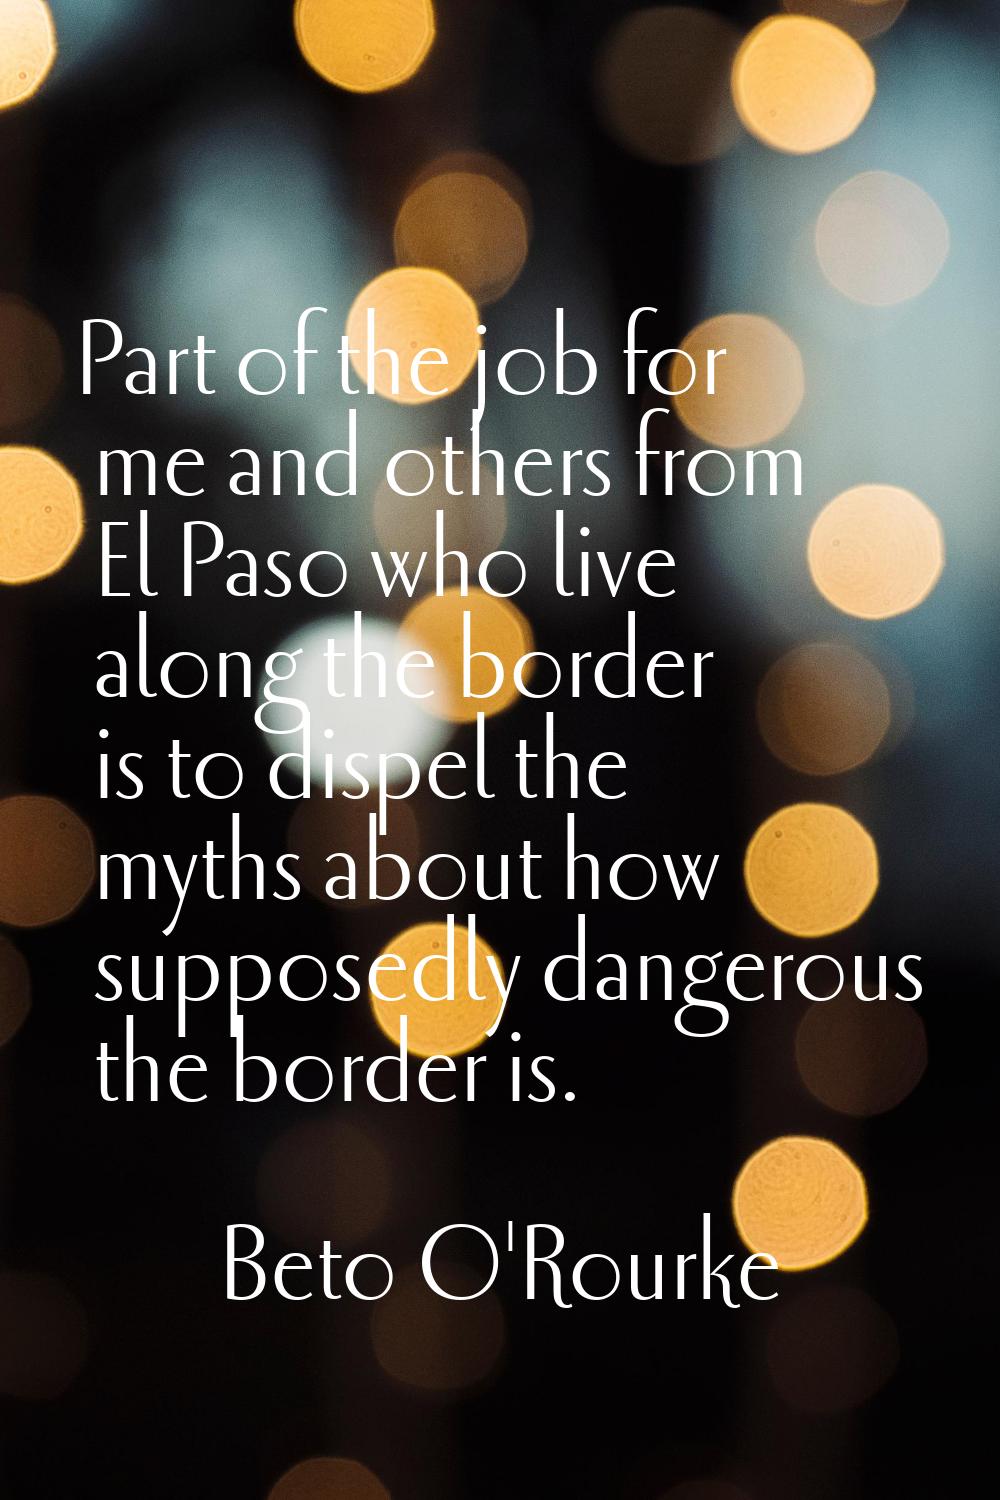 Part of the job for me and others from El Paso who live along the border is to dispel the myths abo